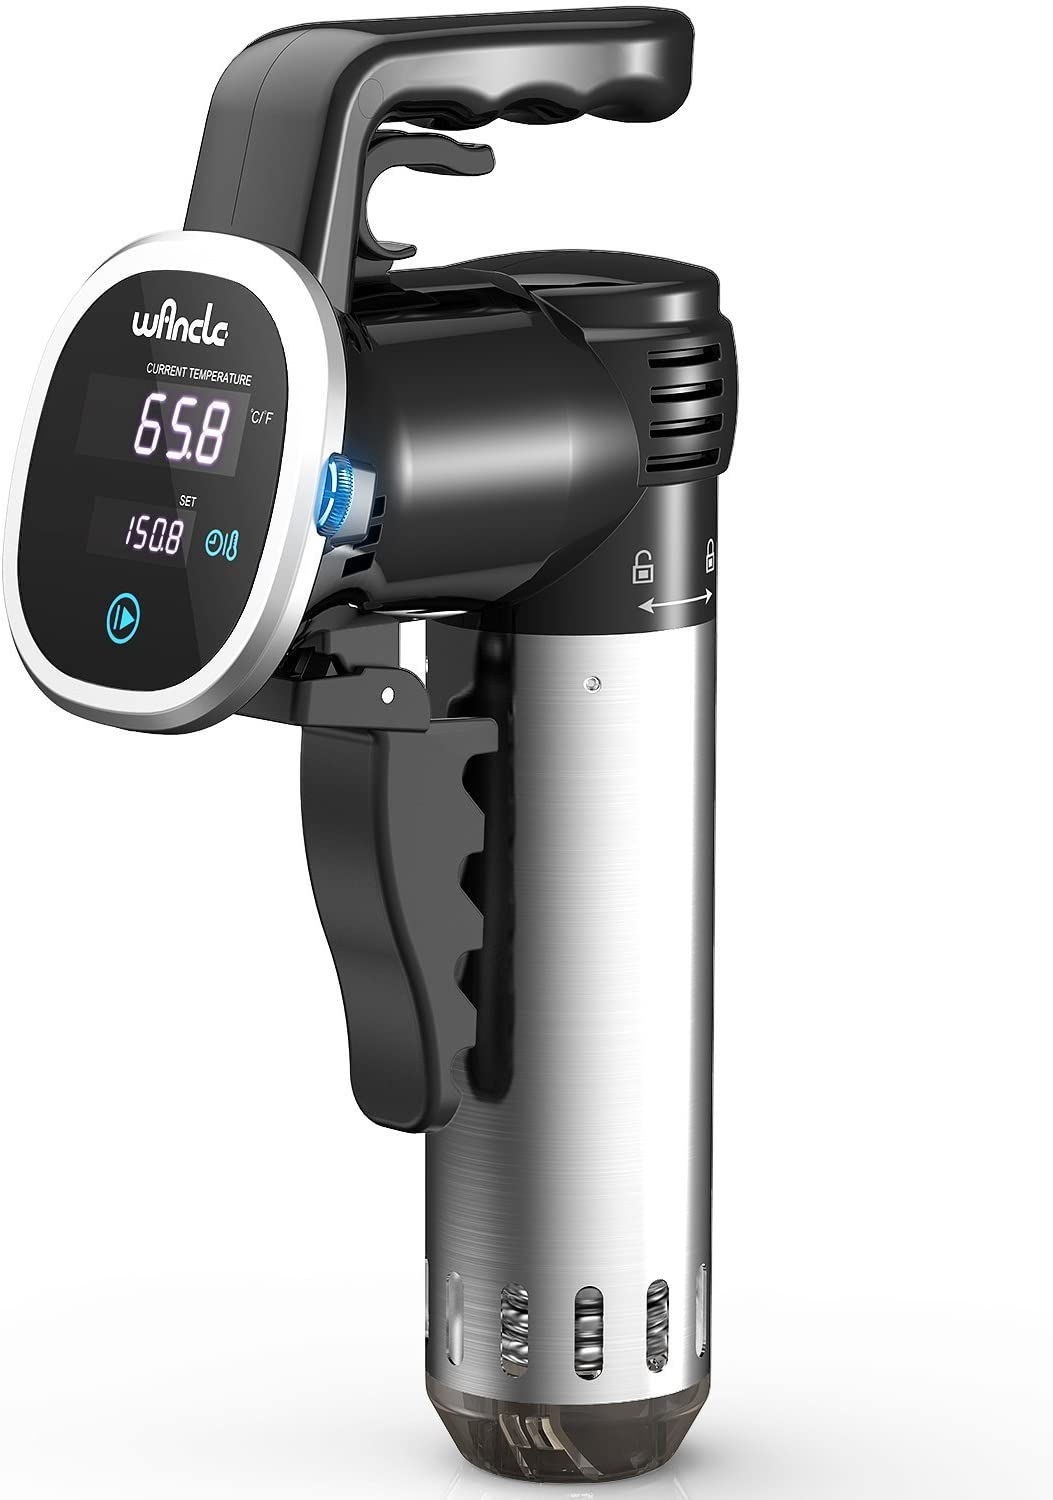 Wancle One-Handed Sous Vide For The Home Cook